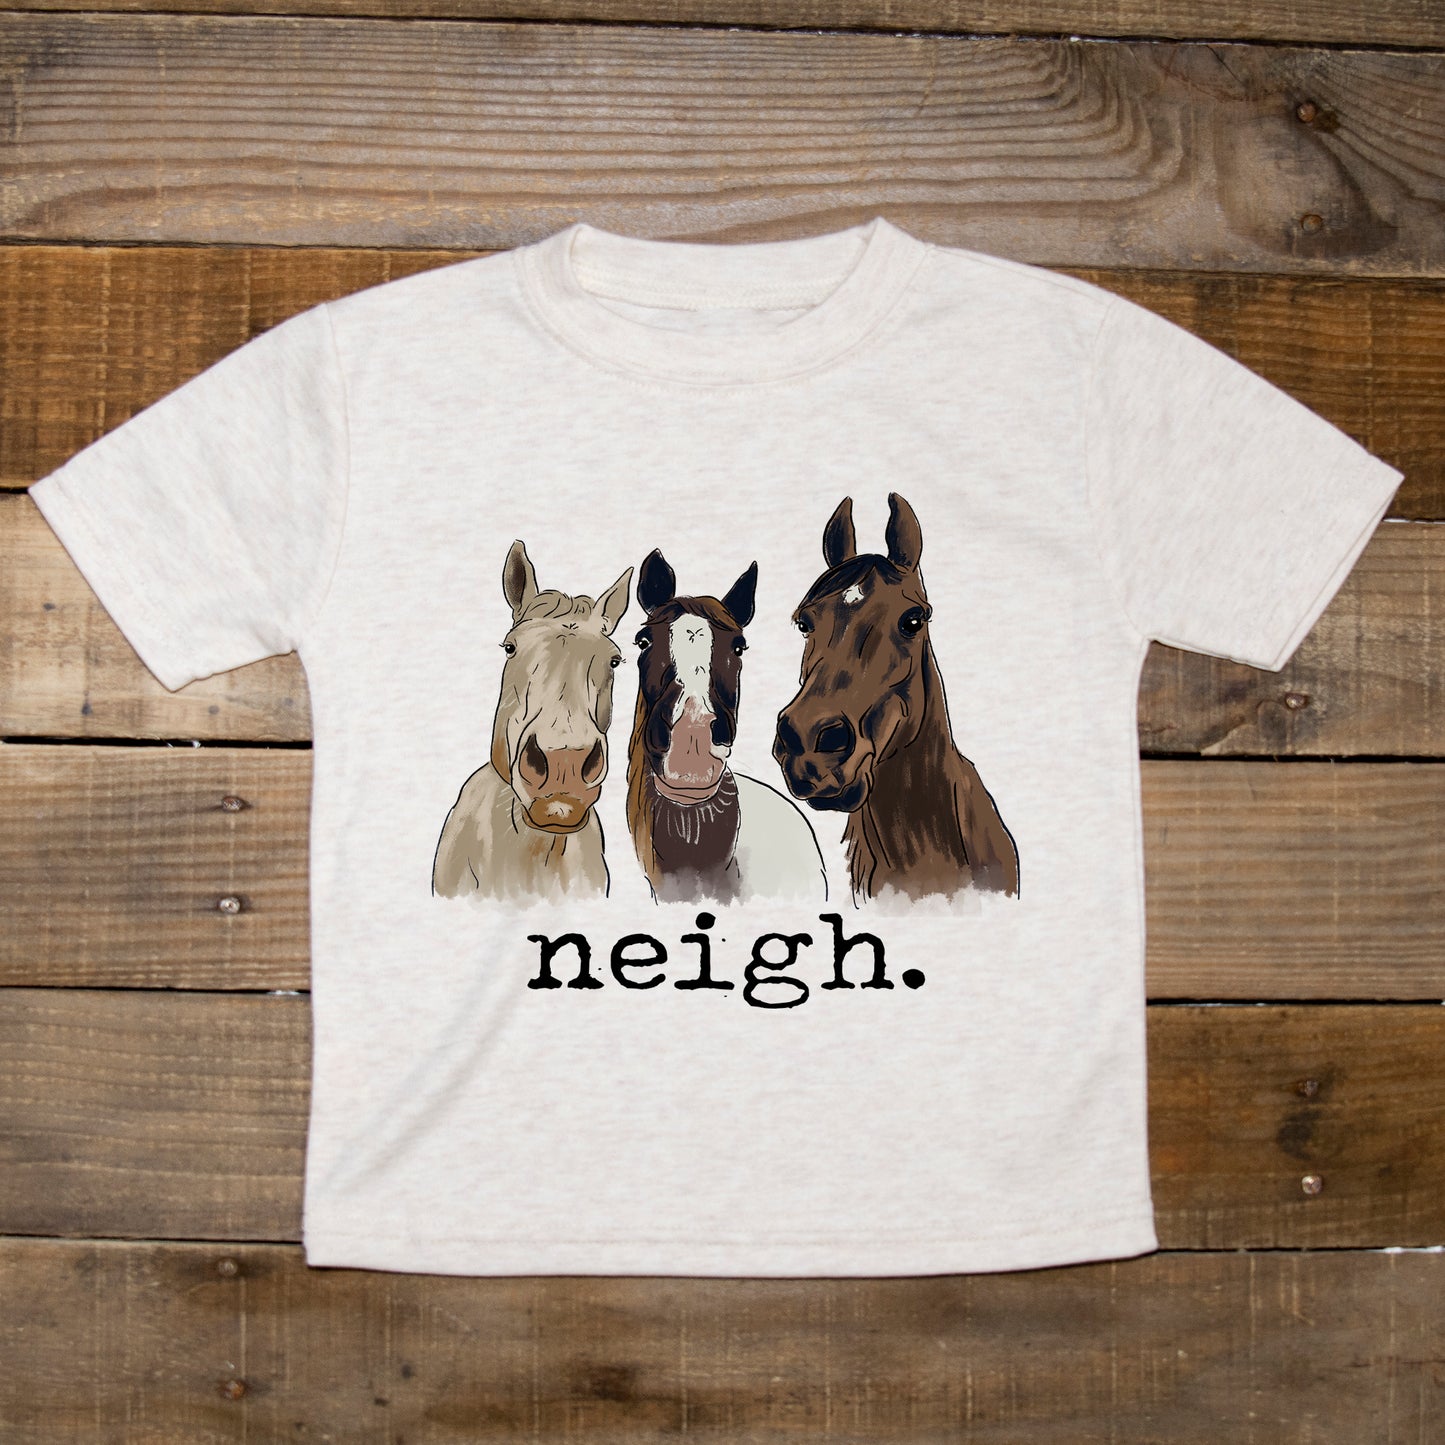 "Neigh" horse Toddler/Youth Tee